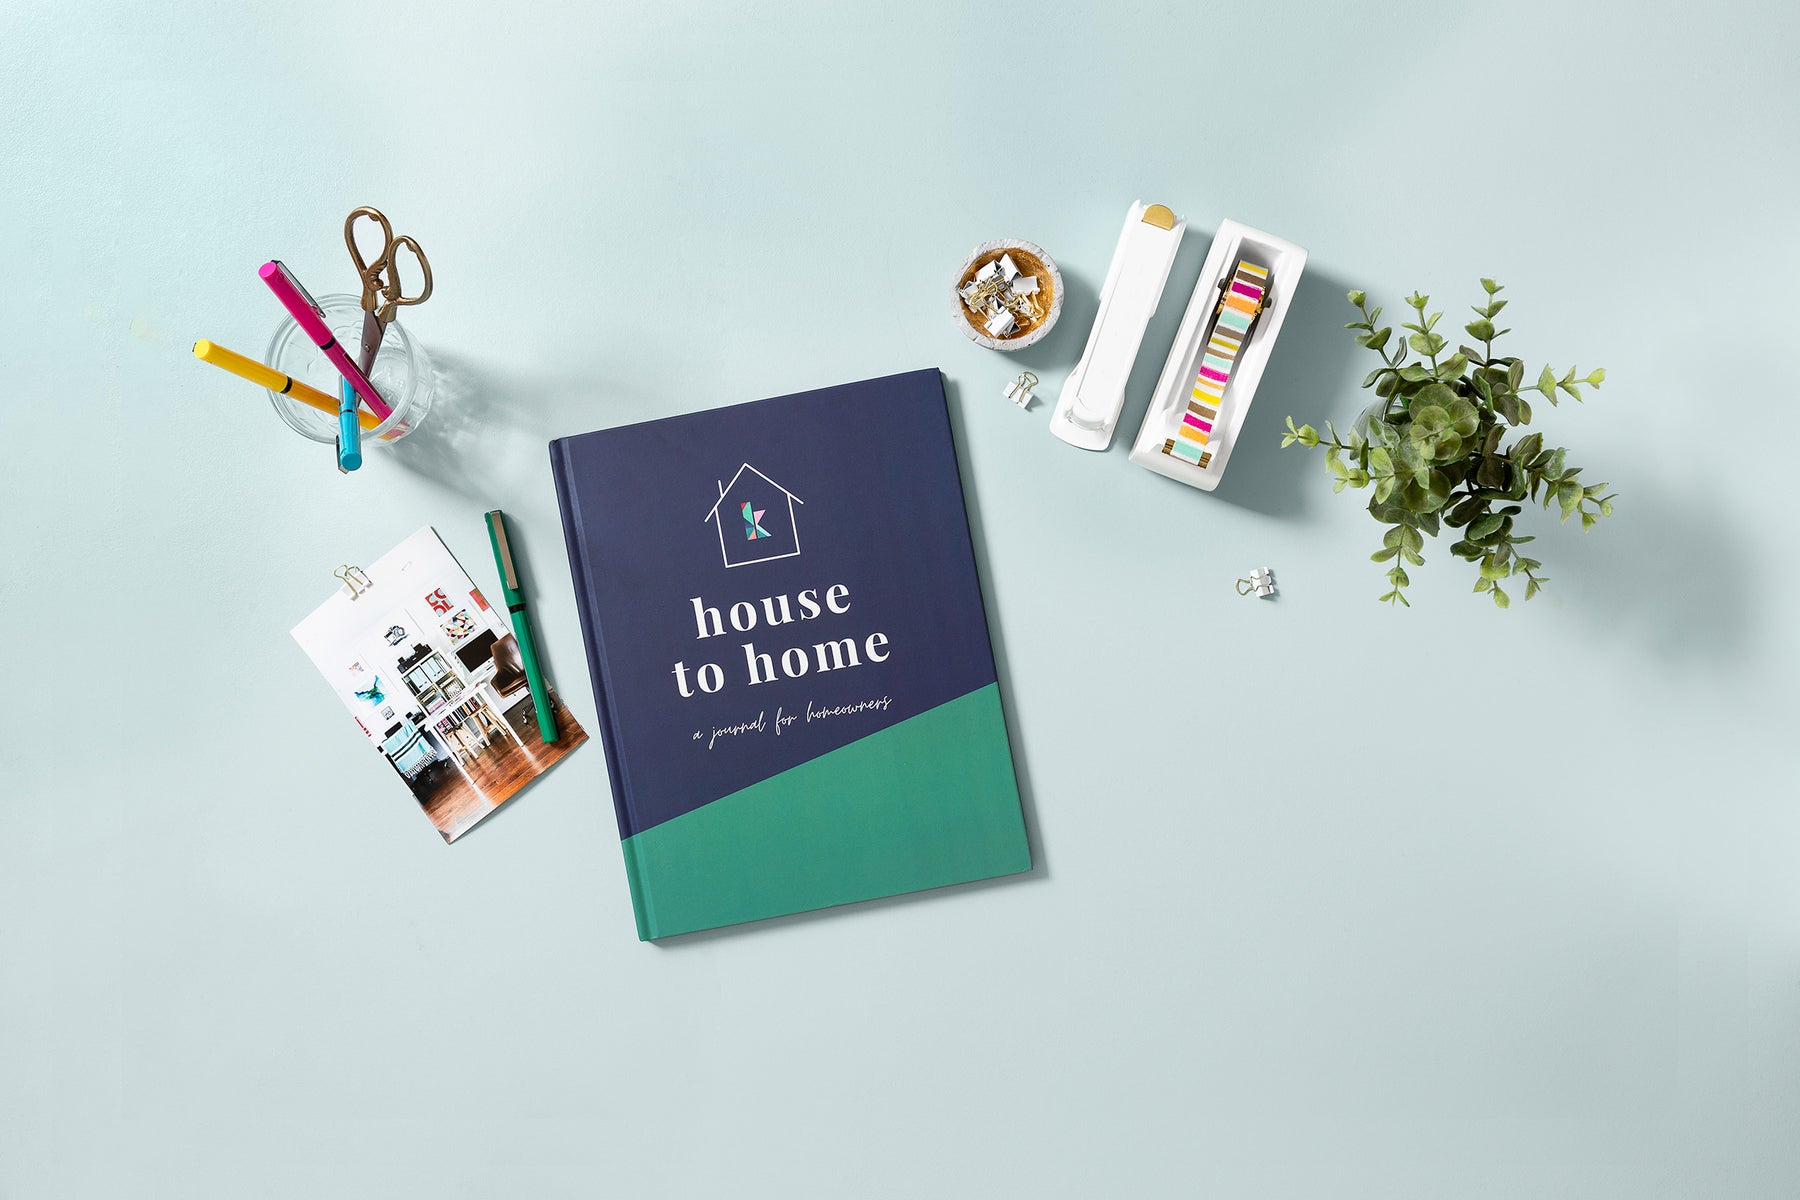 The Home Owner's Journal, Fifth Edition